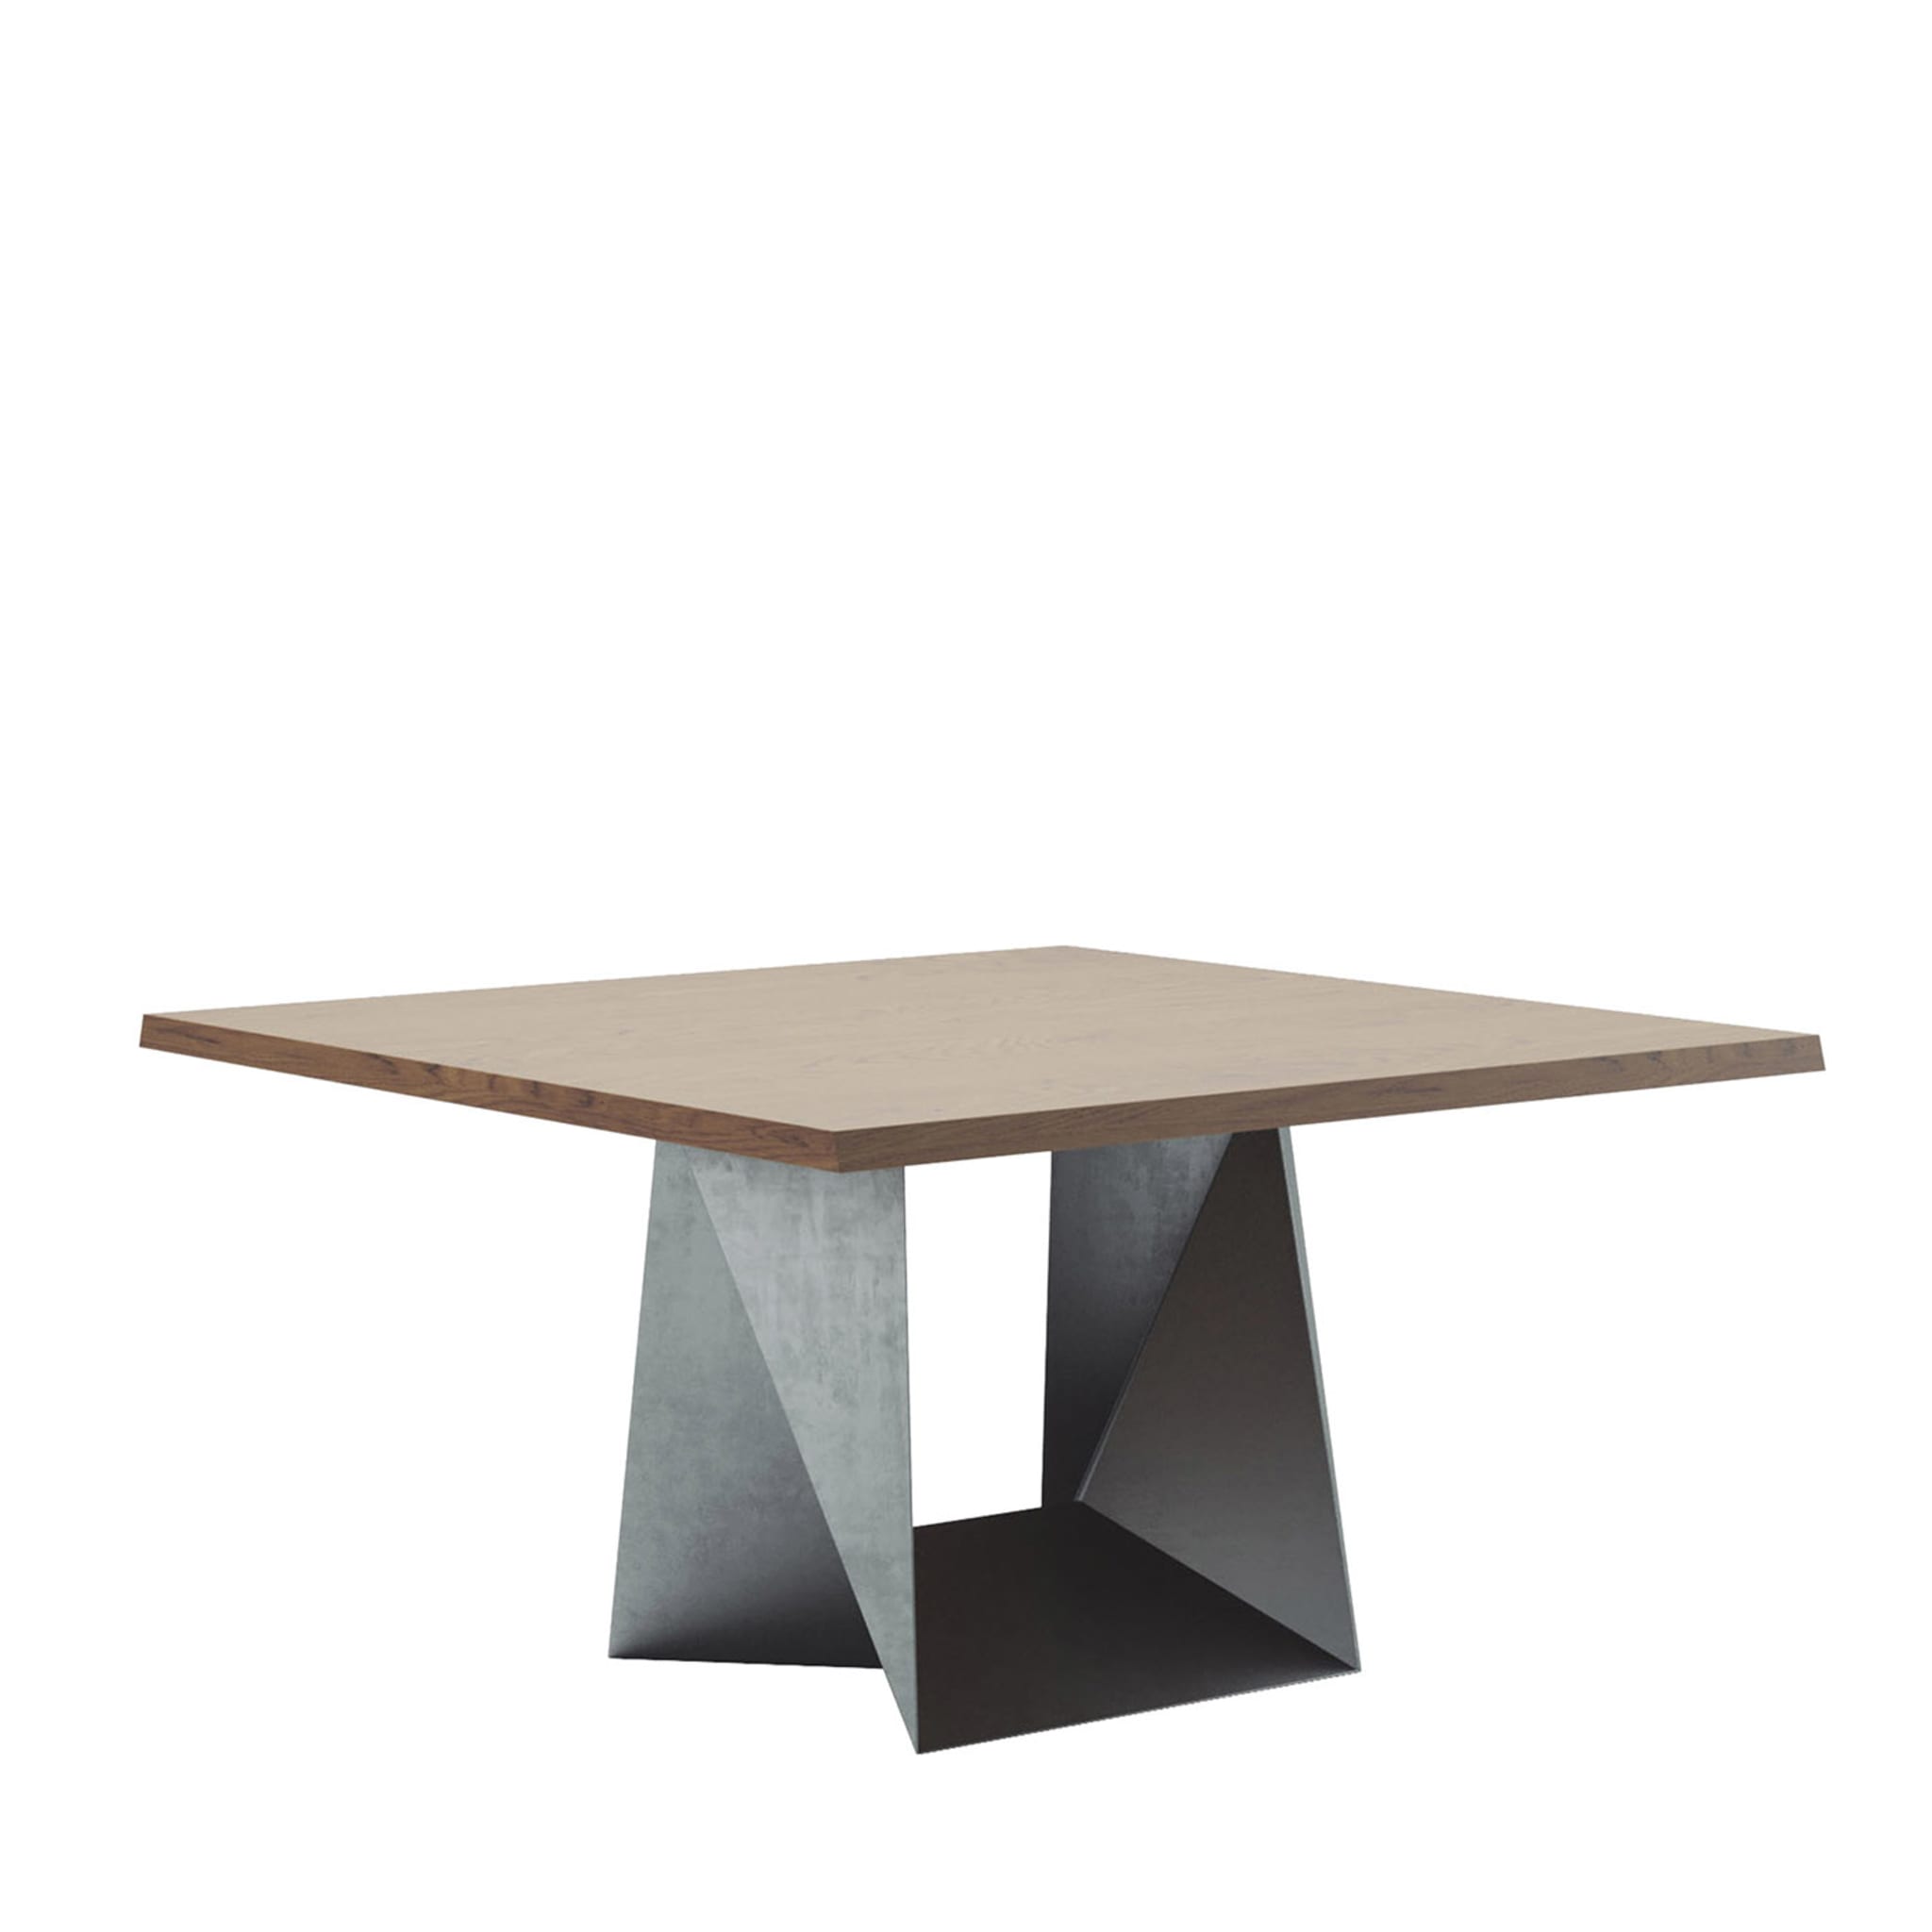 Clint Ash Walnut Square Dining Table  - Main view